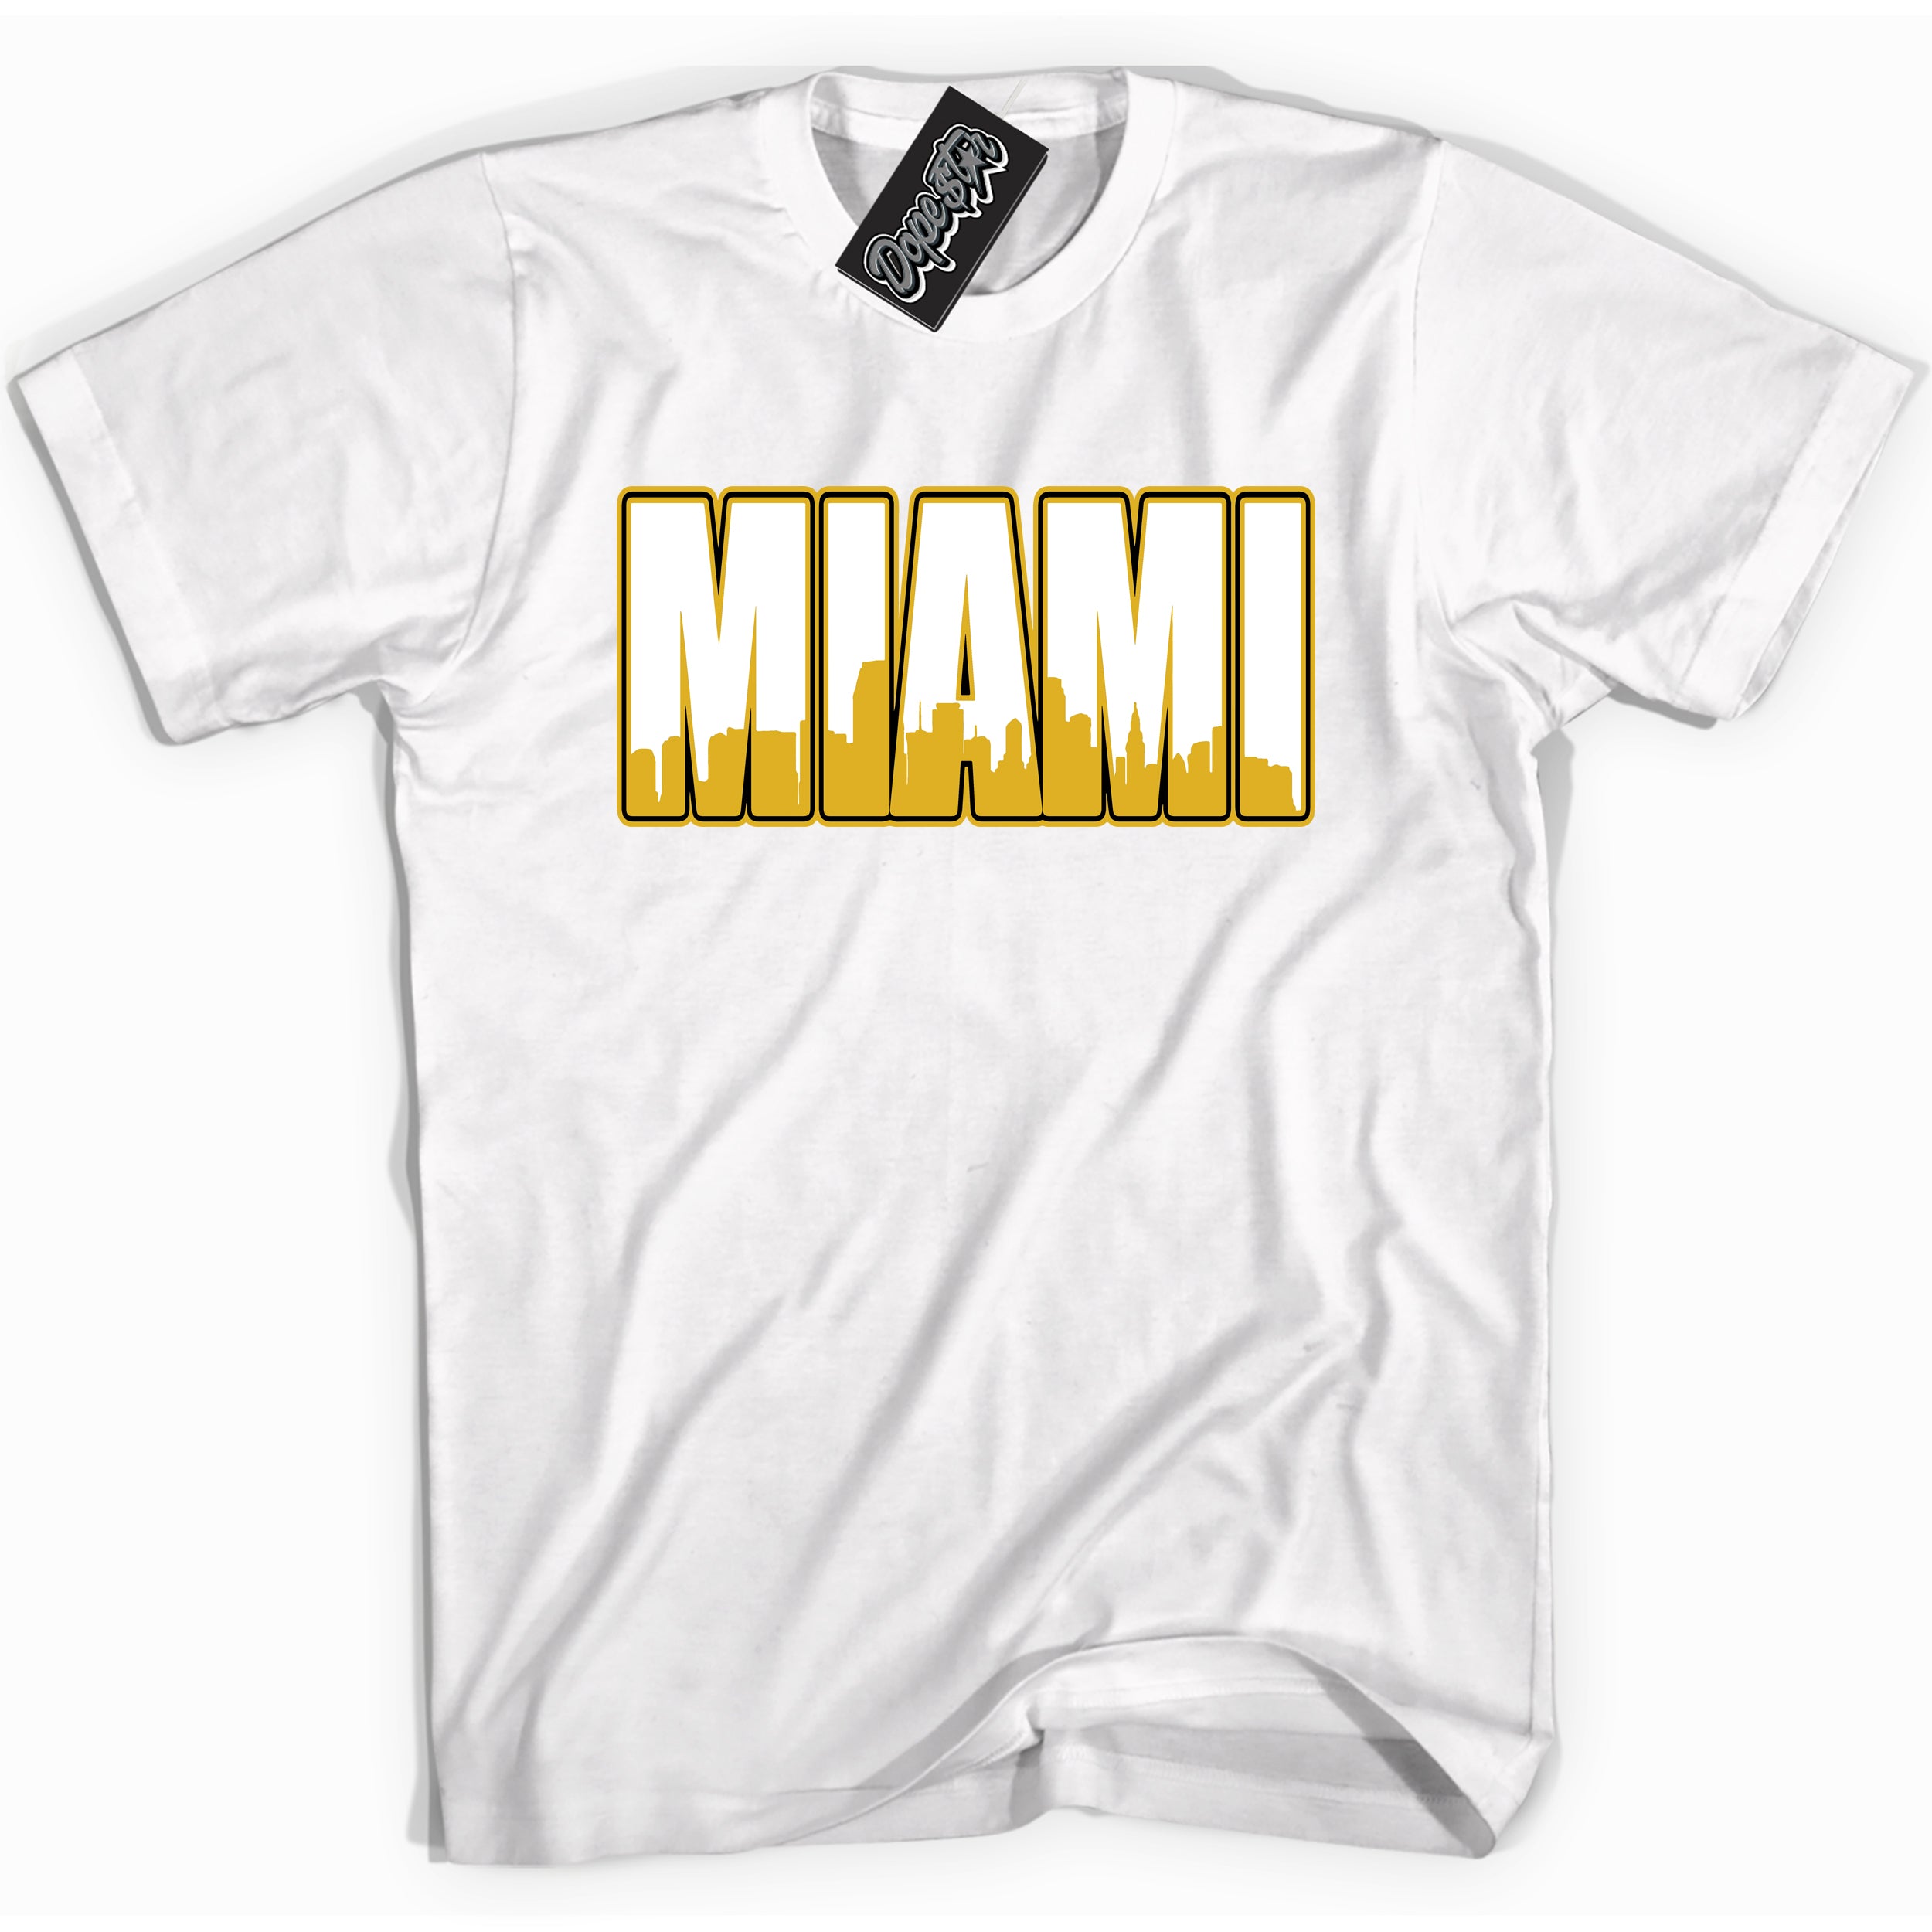 Cool White Shirt with “ Miami” design that perfectly matches Yellow Ochre 6s Sneakers.